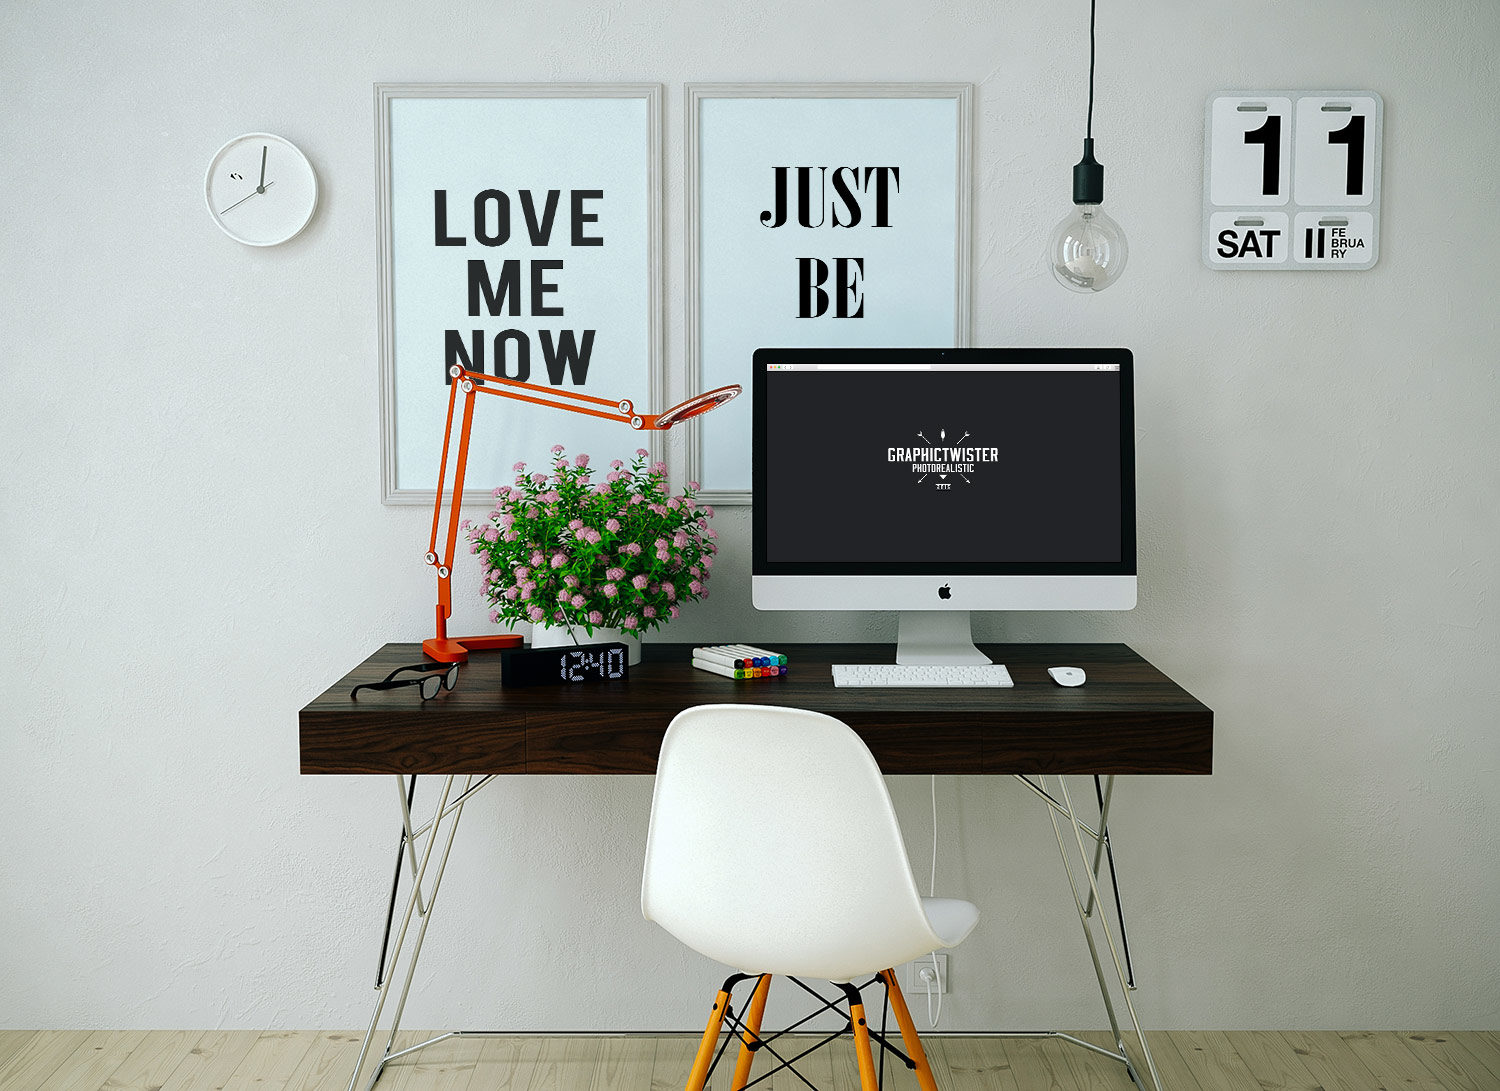 Download Workspace iMac and 2 Wall Frames - Free PSD Mockup | Free ...